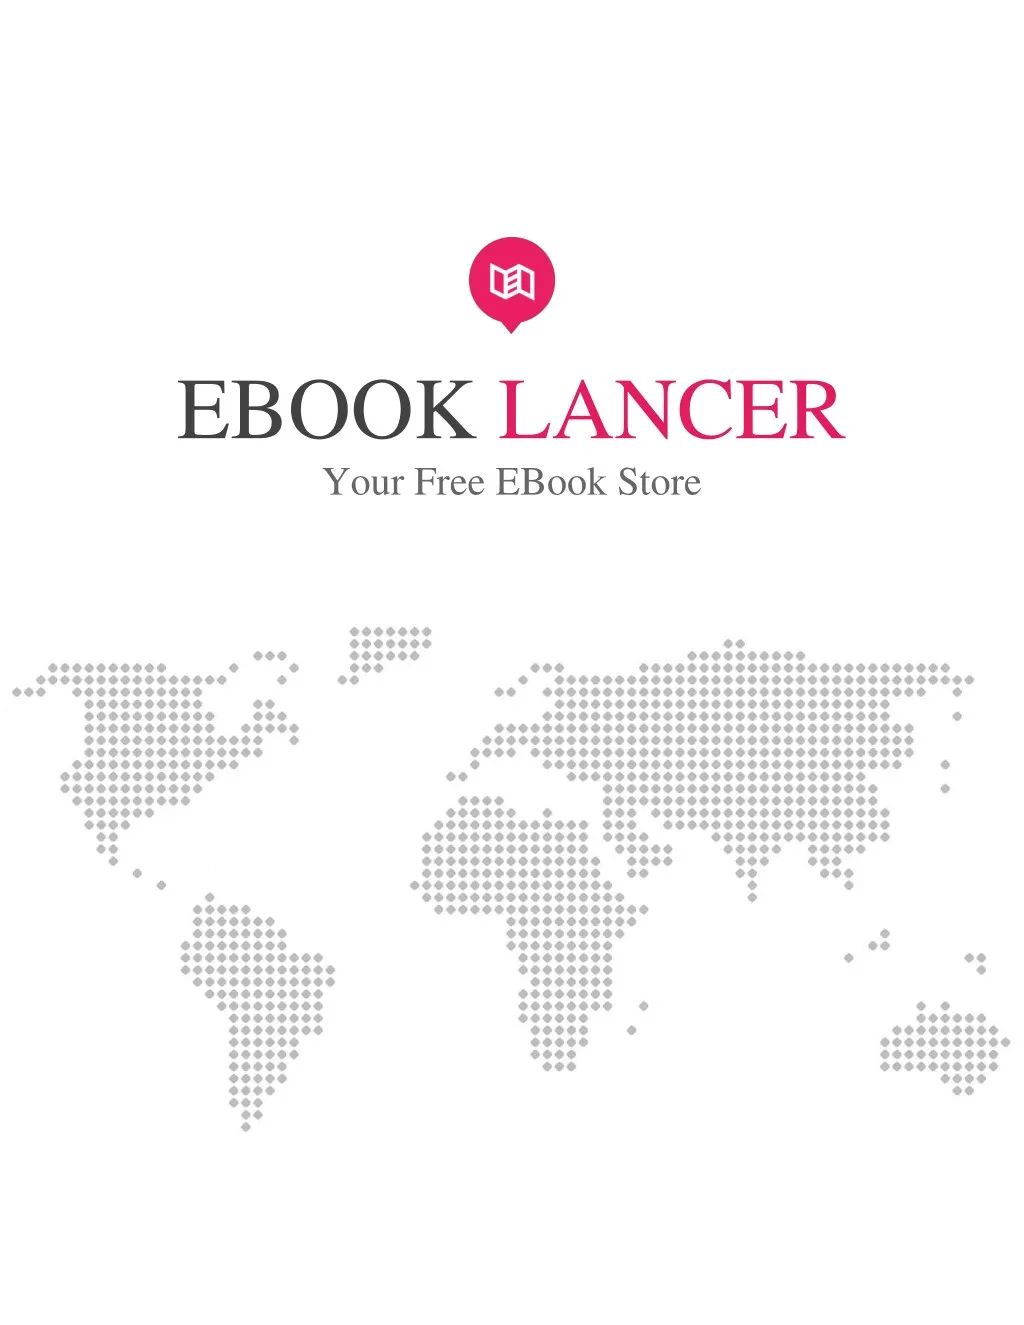 ebook lancer your free ebook store